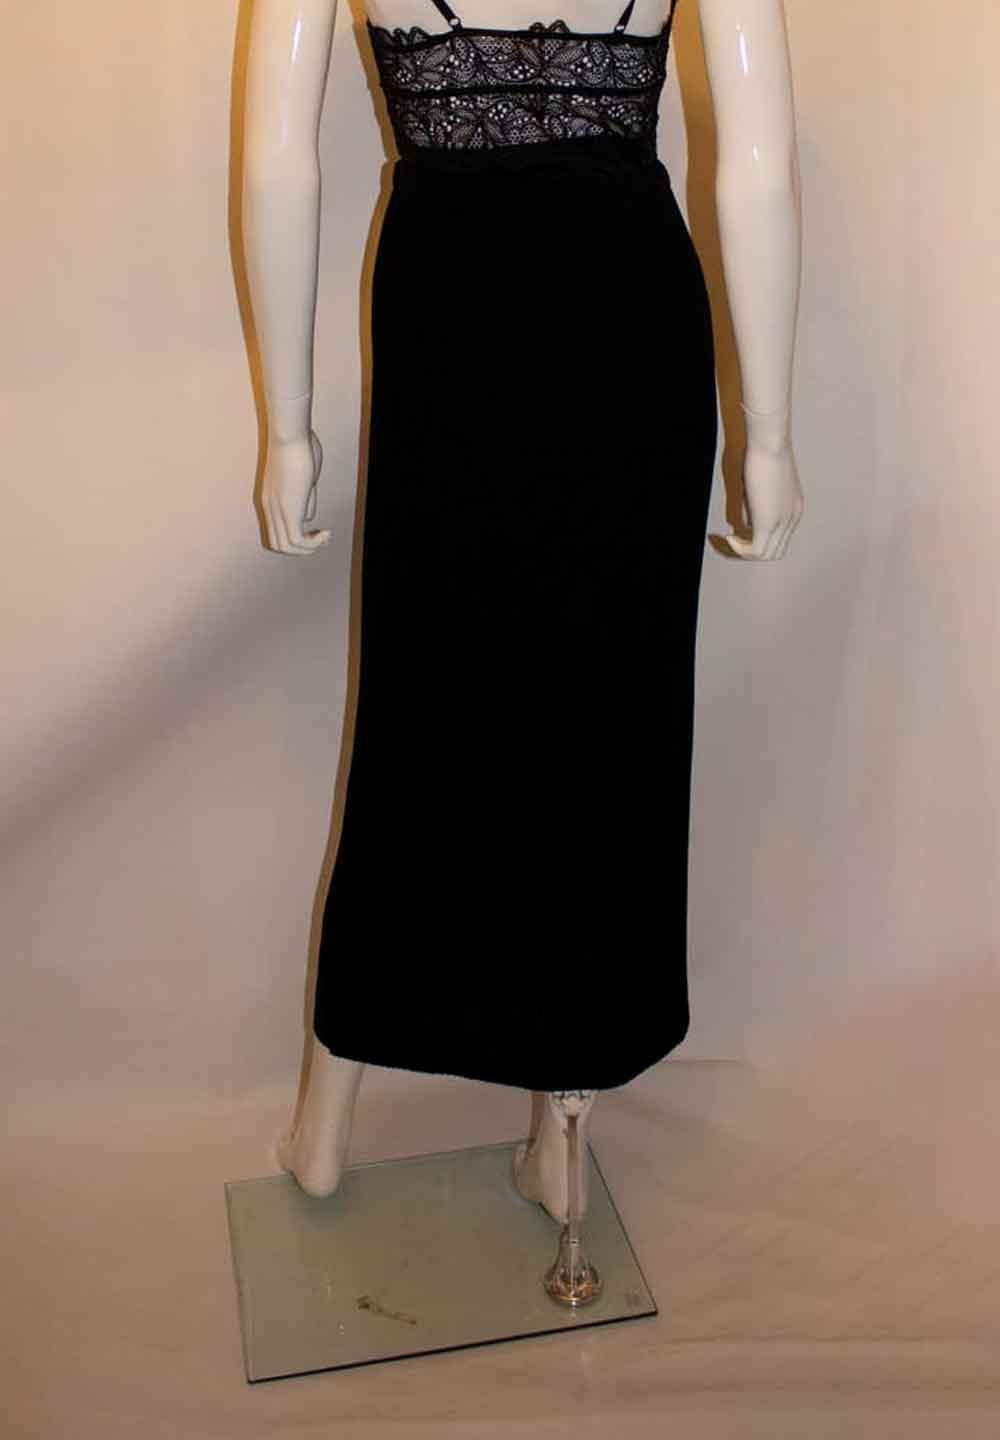 A chic and easy to wear black skirt by Issey Miyake , mainline.  Size S , model IM77 FG 601, the skirt has a decorative dark vertical band on the right hand side. Measurements: waist 24'' - 30'', length 38''